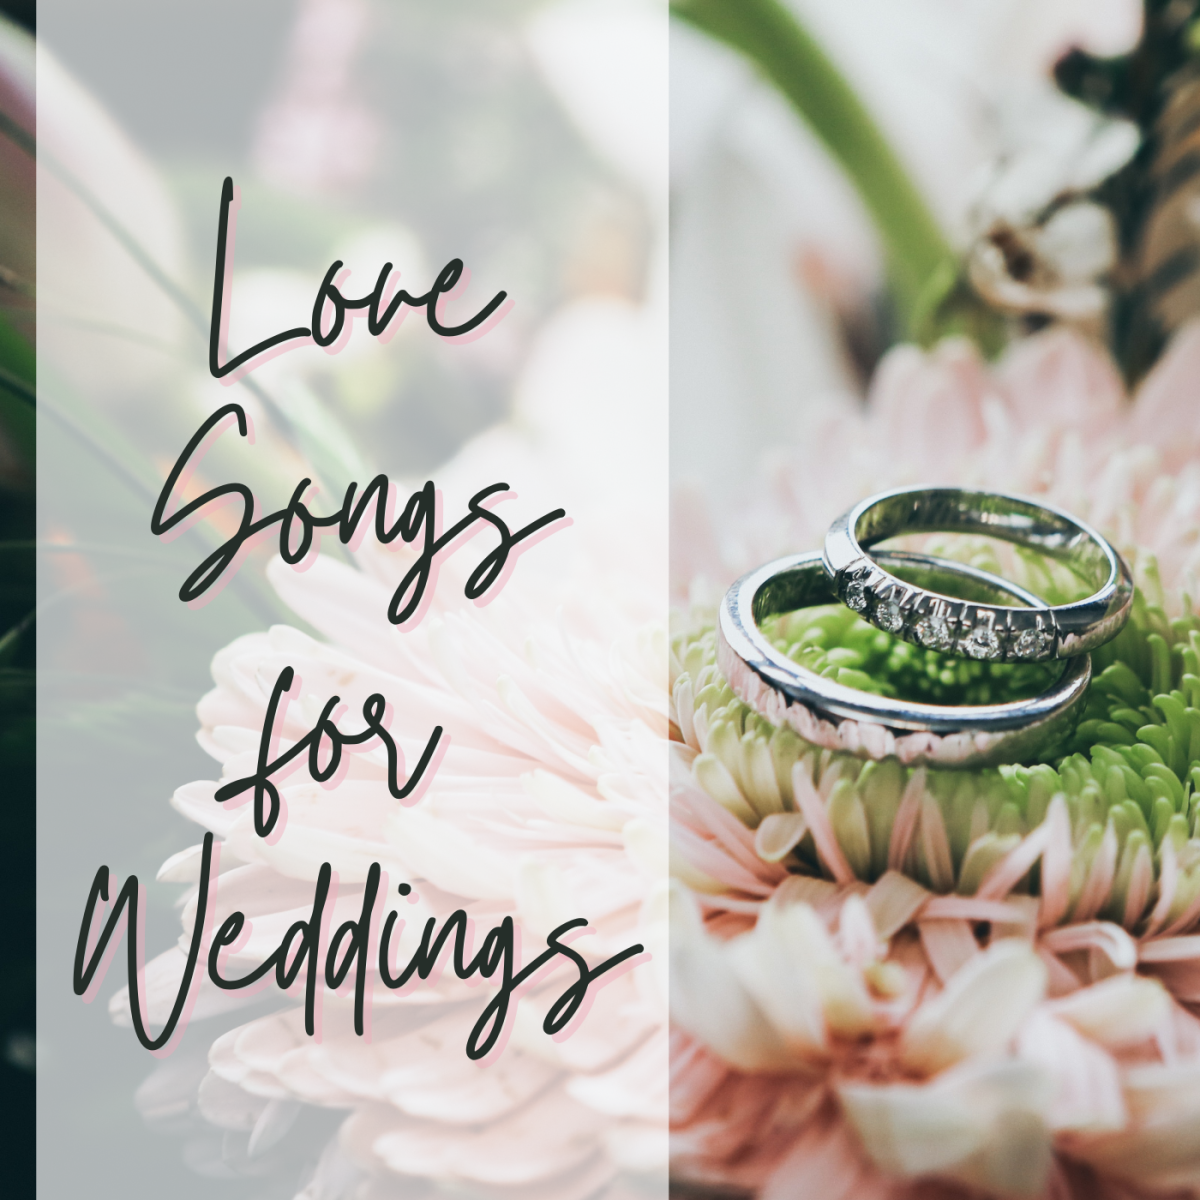 Create a beautiful wedding with these romantic songs for your ceremony or album.